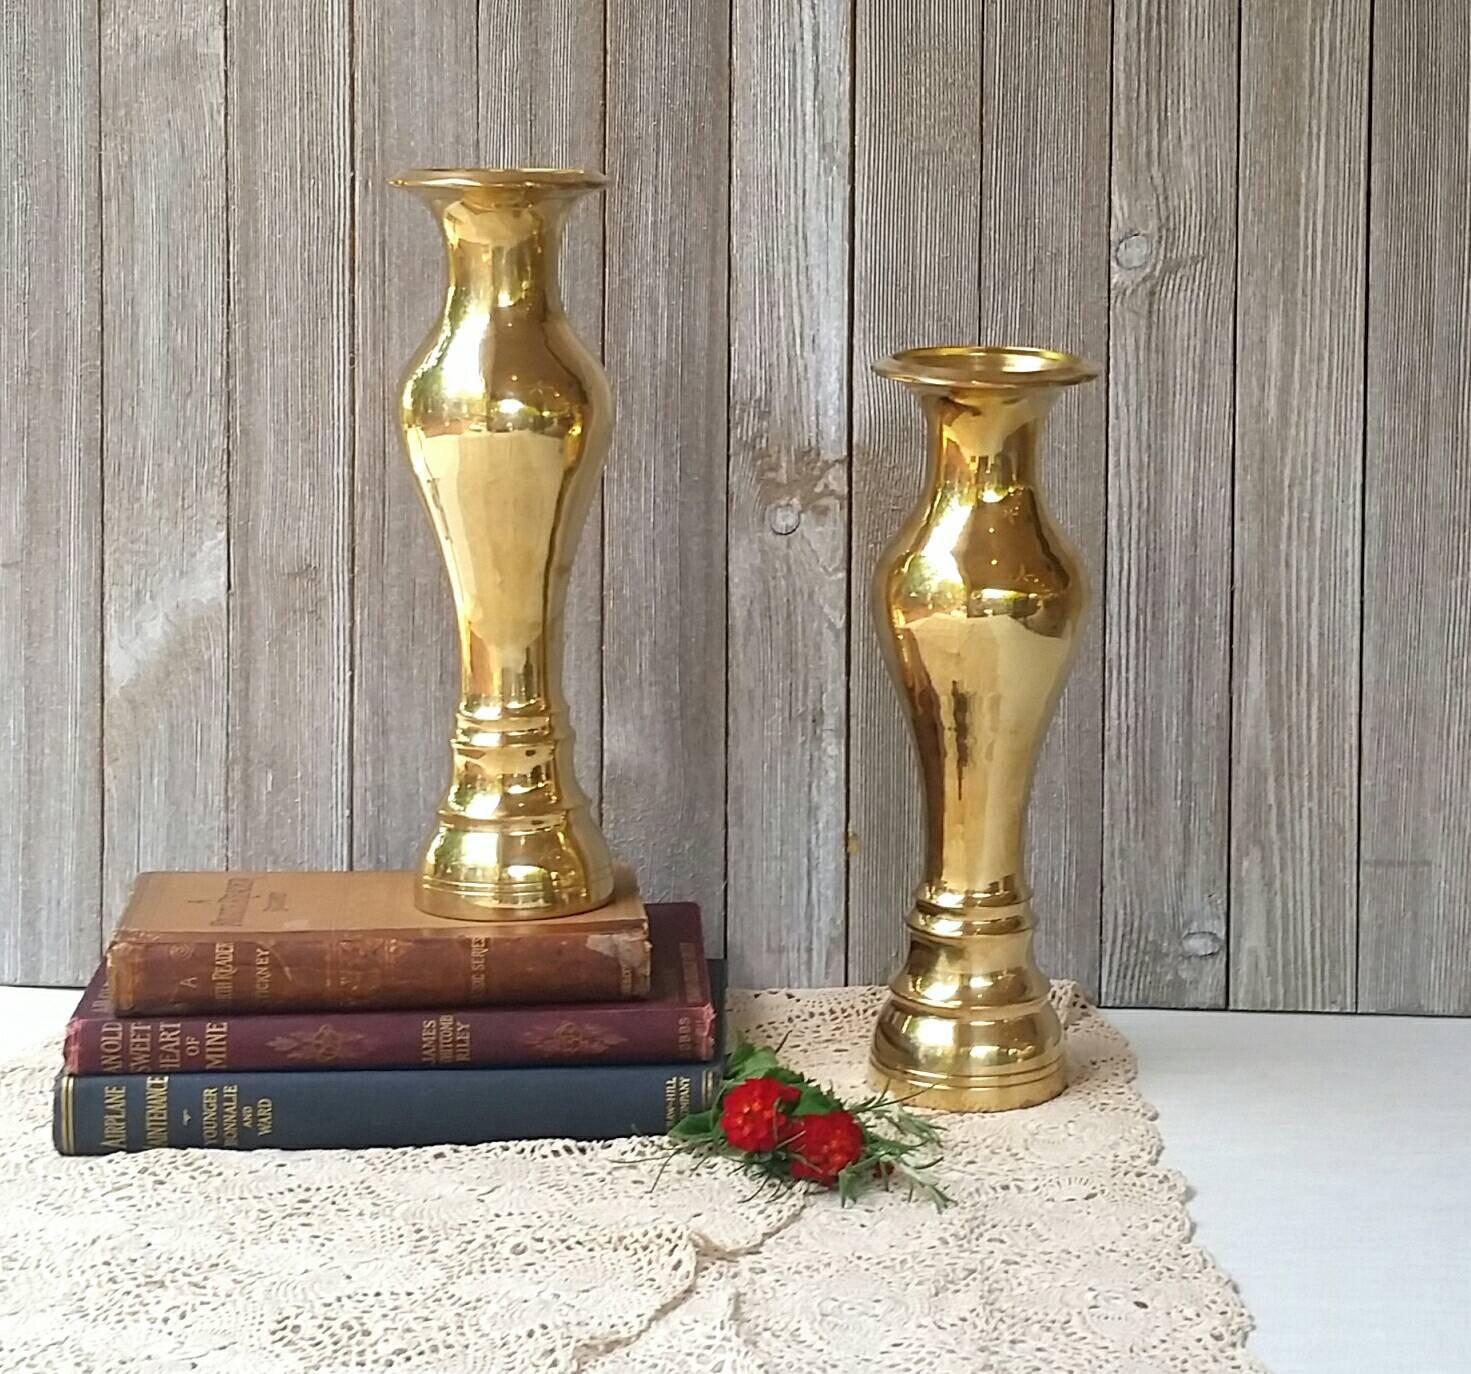 14 Ideal Mini Clear Glass Bud Vases 2024 free download mini clear glass bud vases of 2 large vintage brass vases heavy brass bud vases 11 etsy in dc29fc294c28ezoom